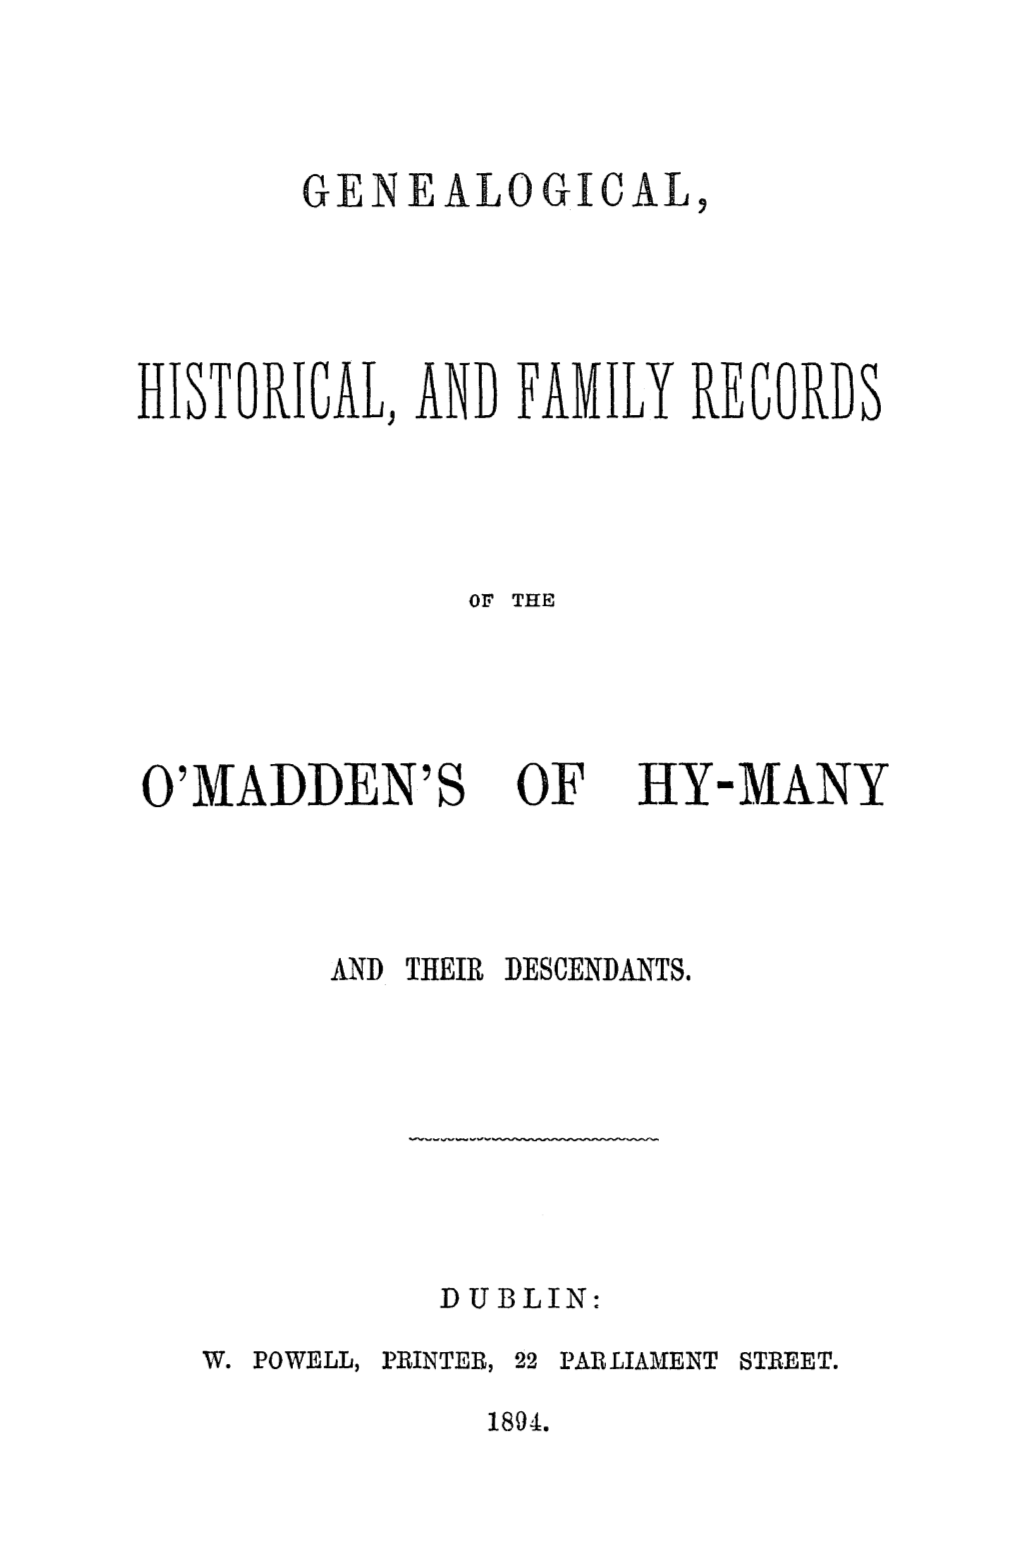 Historical, and Family Records